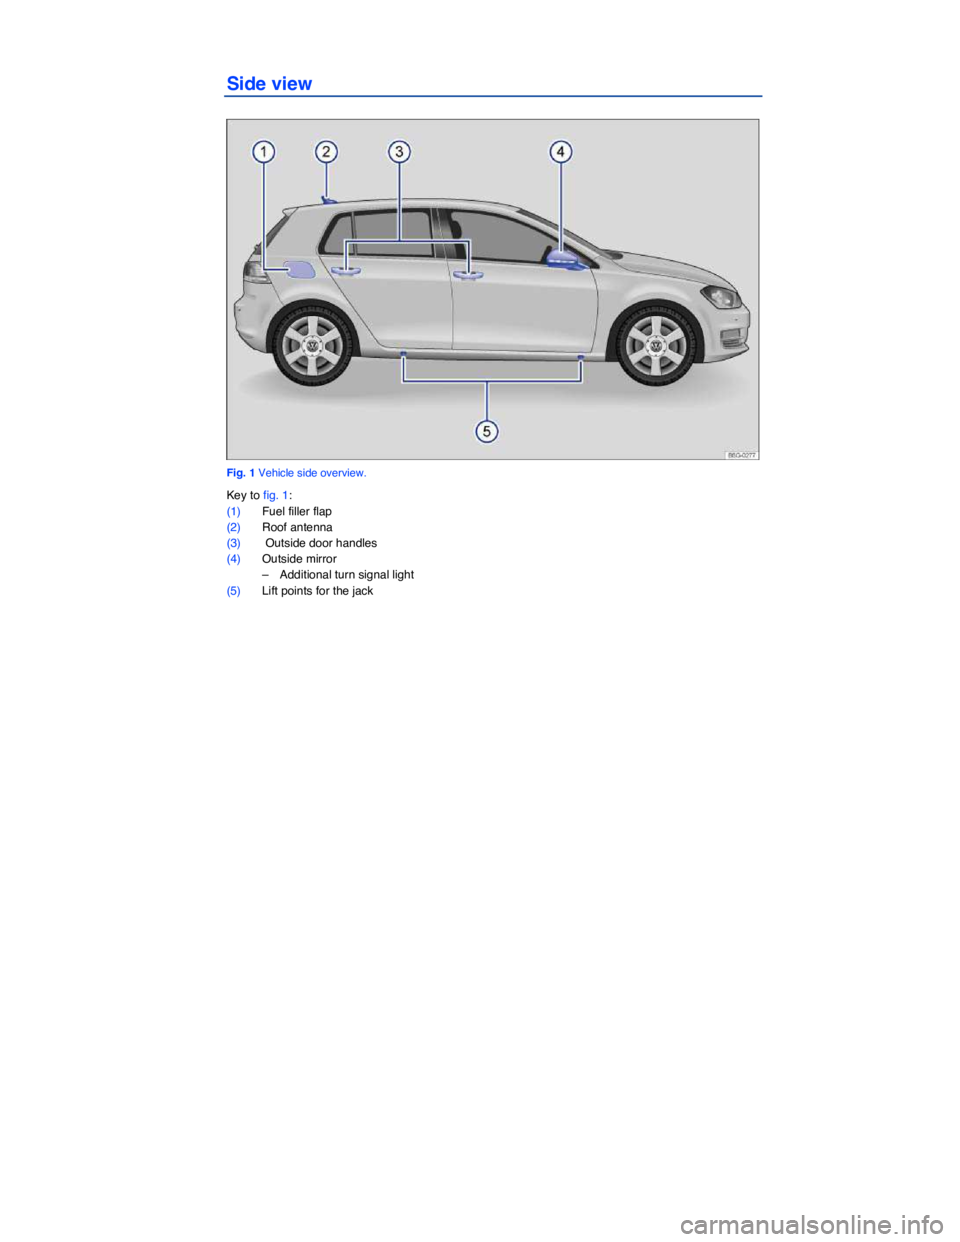 VOLKSWAGEN GOLF PLUS 2015  Owner´s Manual   
Side view 
 
Fig. 1 Vehicle side overview. 
Key to fig. 1: 
(1) Fuel filler flap 
(2) Roof antenna  
(3)  Outside door handles  
(4) Outside mirror  
–  Additional turn signal light  
(5) Lift po